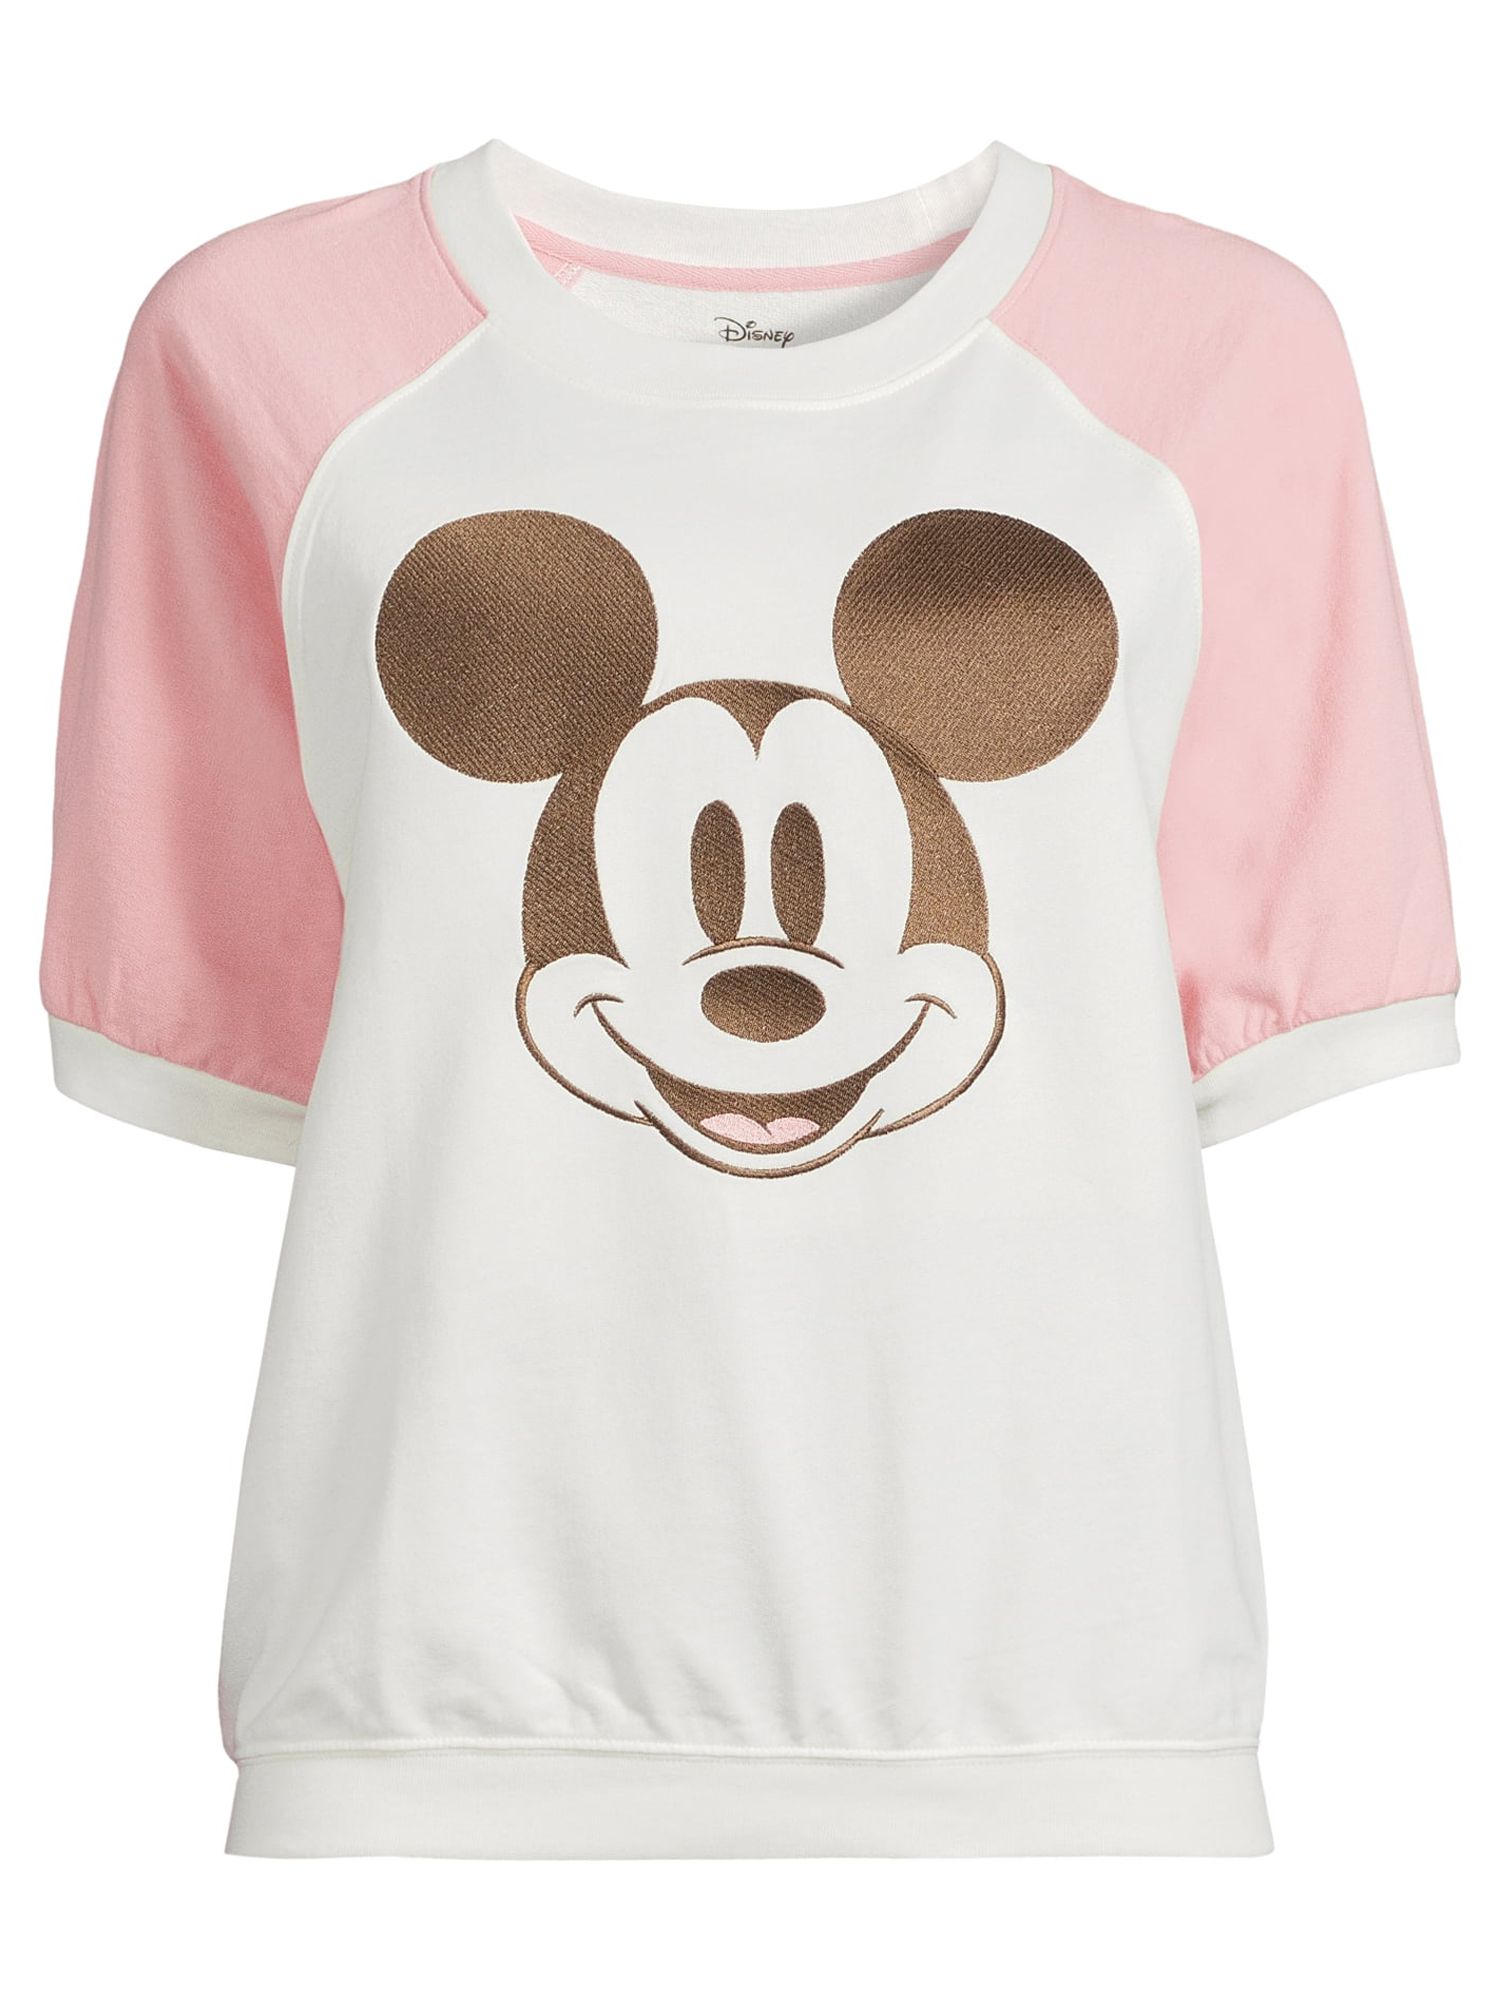 Disney Women's and Women's Plus Mickey Mouse Short Sleeve Top - image 4 of 5